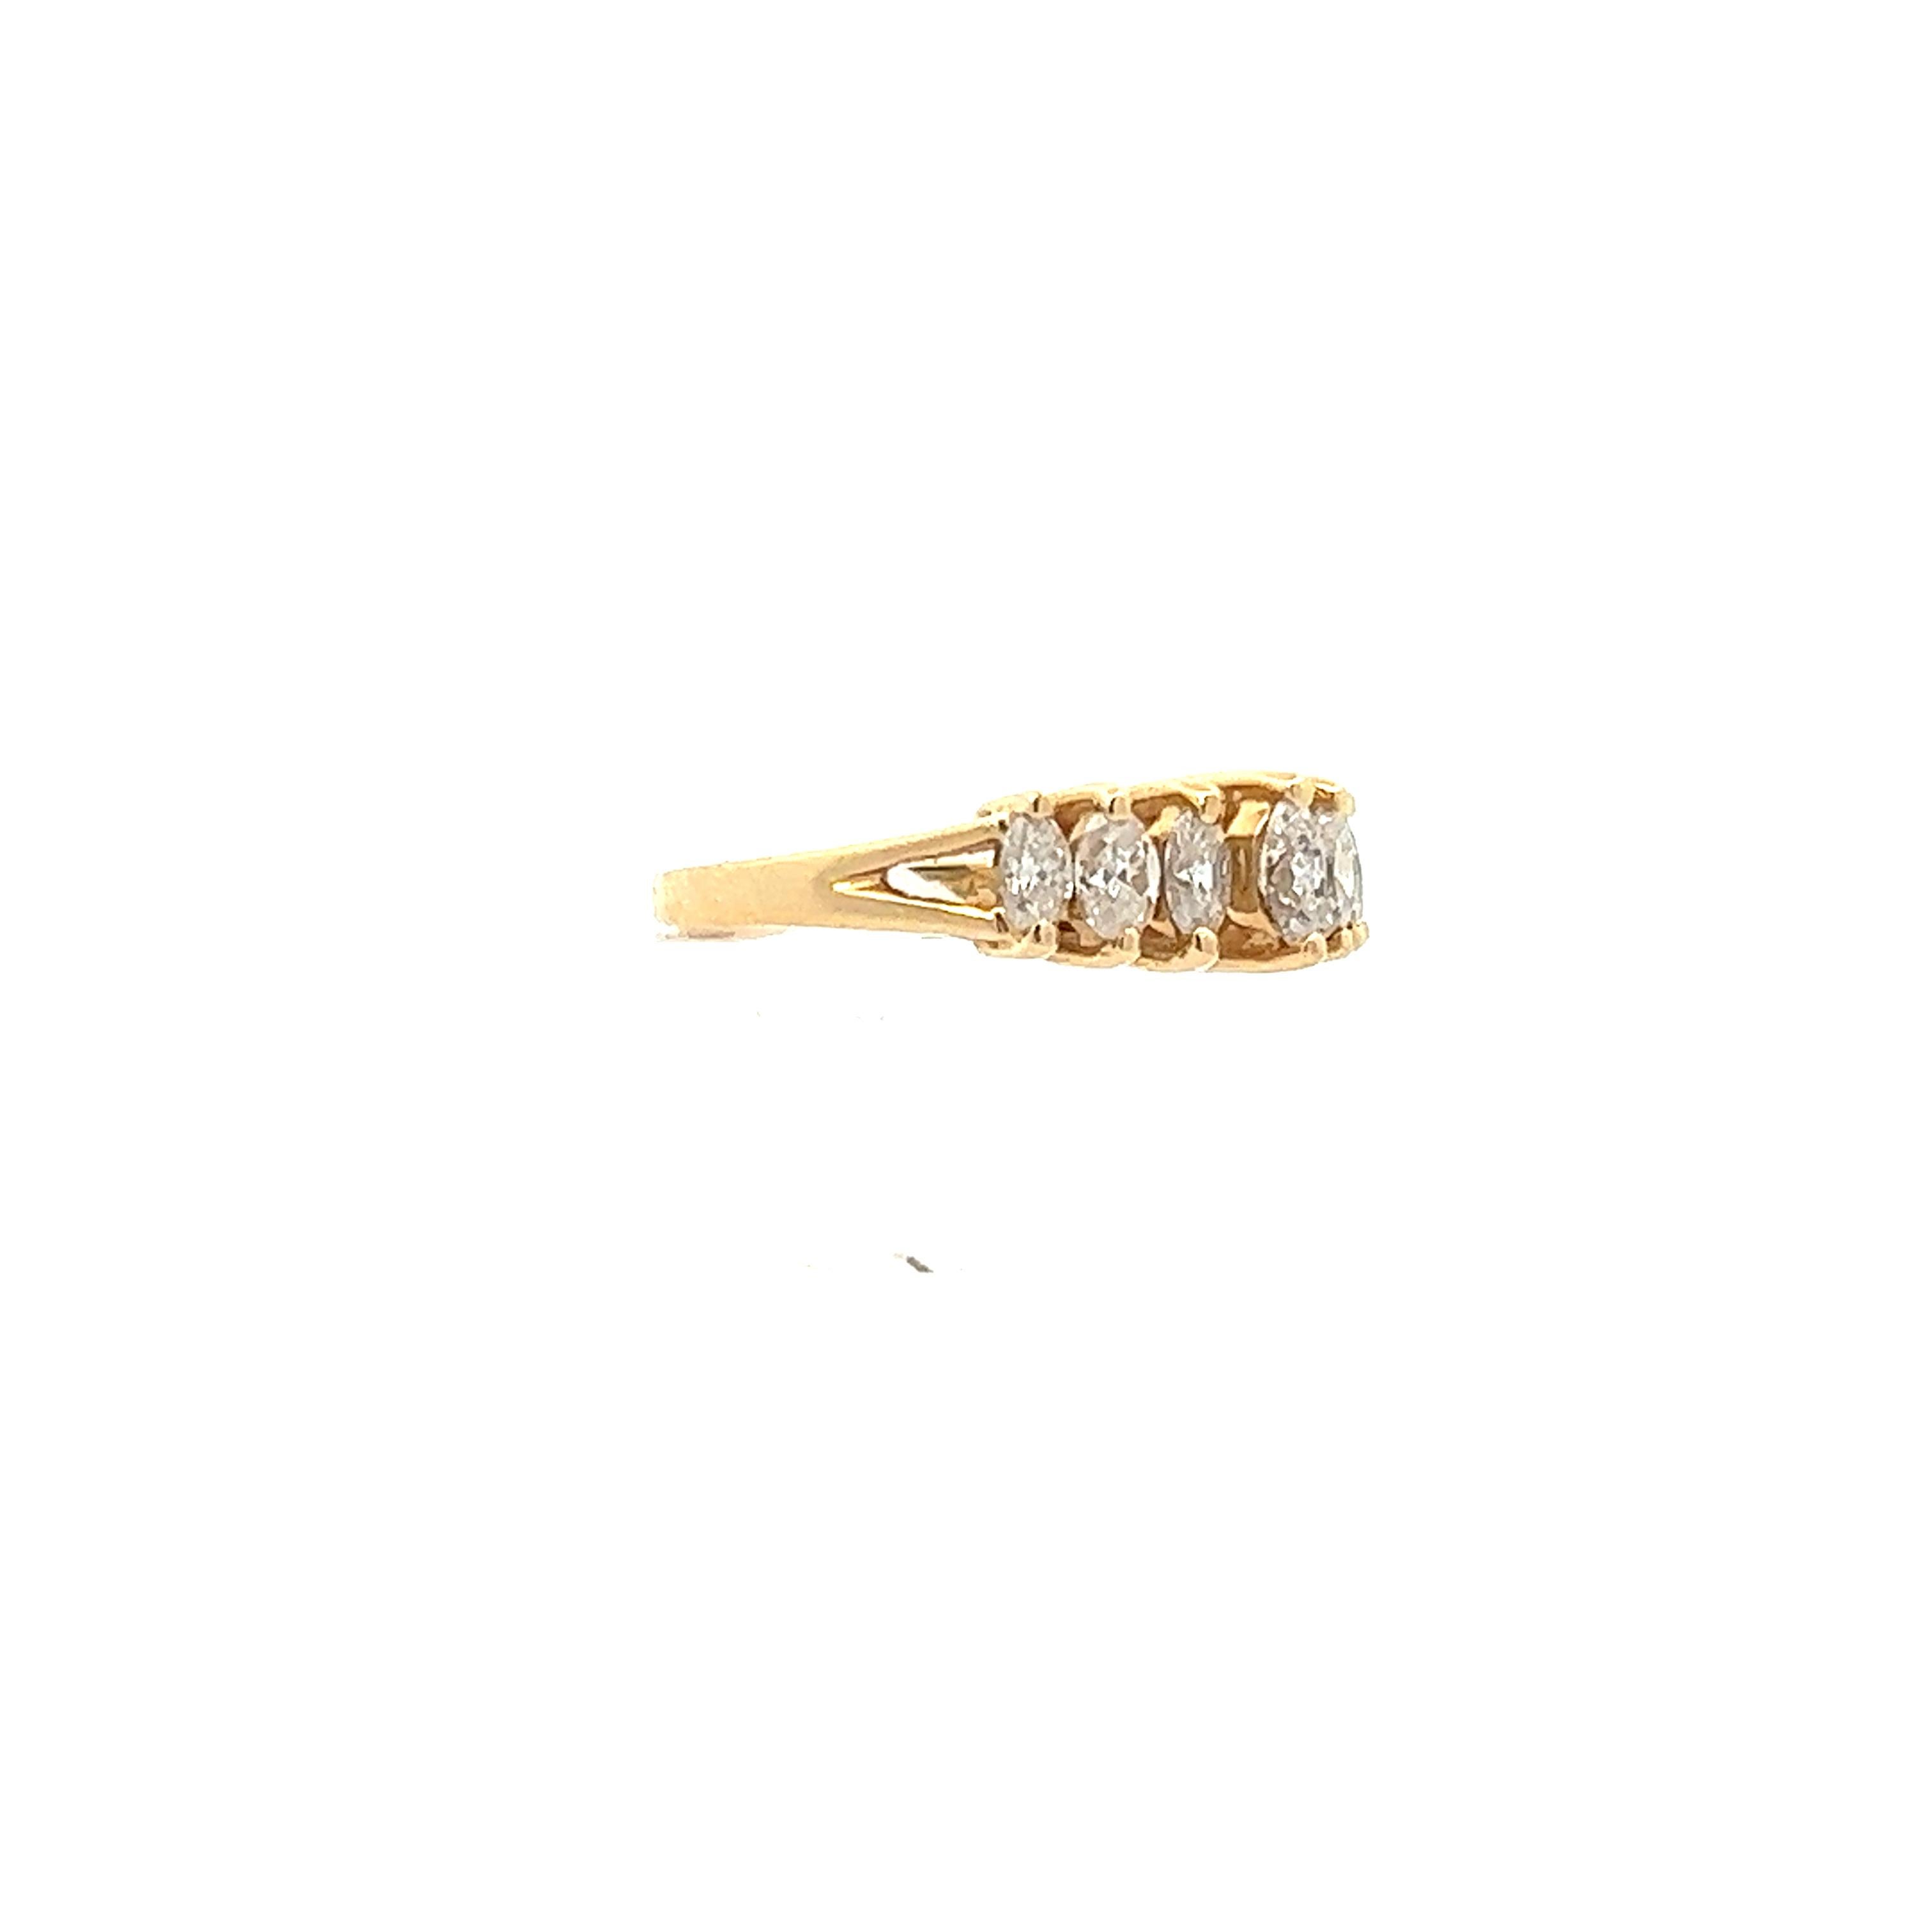 Women's or Men's Contemporary 14k Yellow Gold Marquise Diamond Ring 